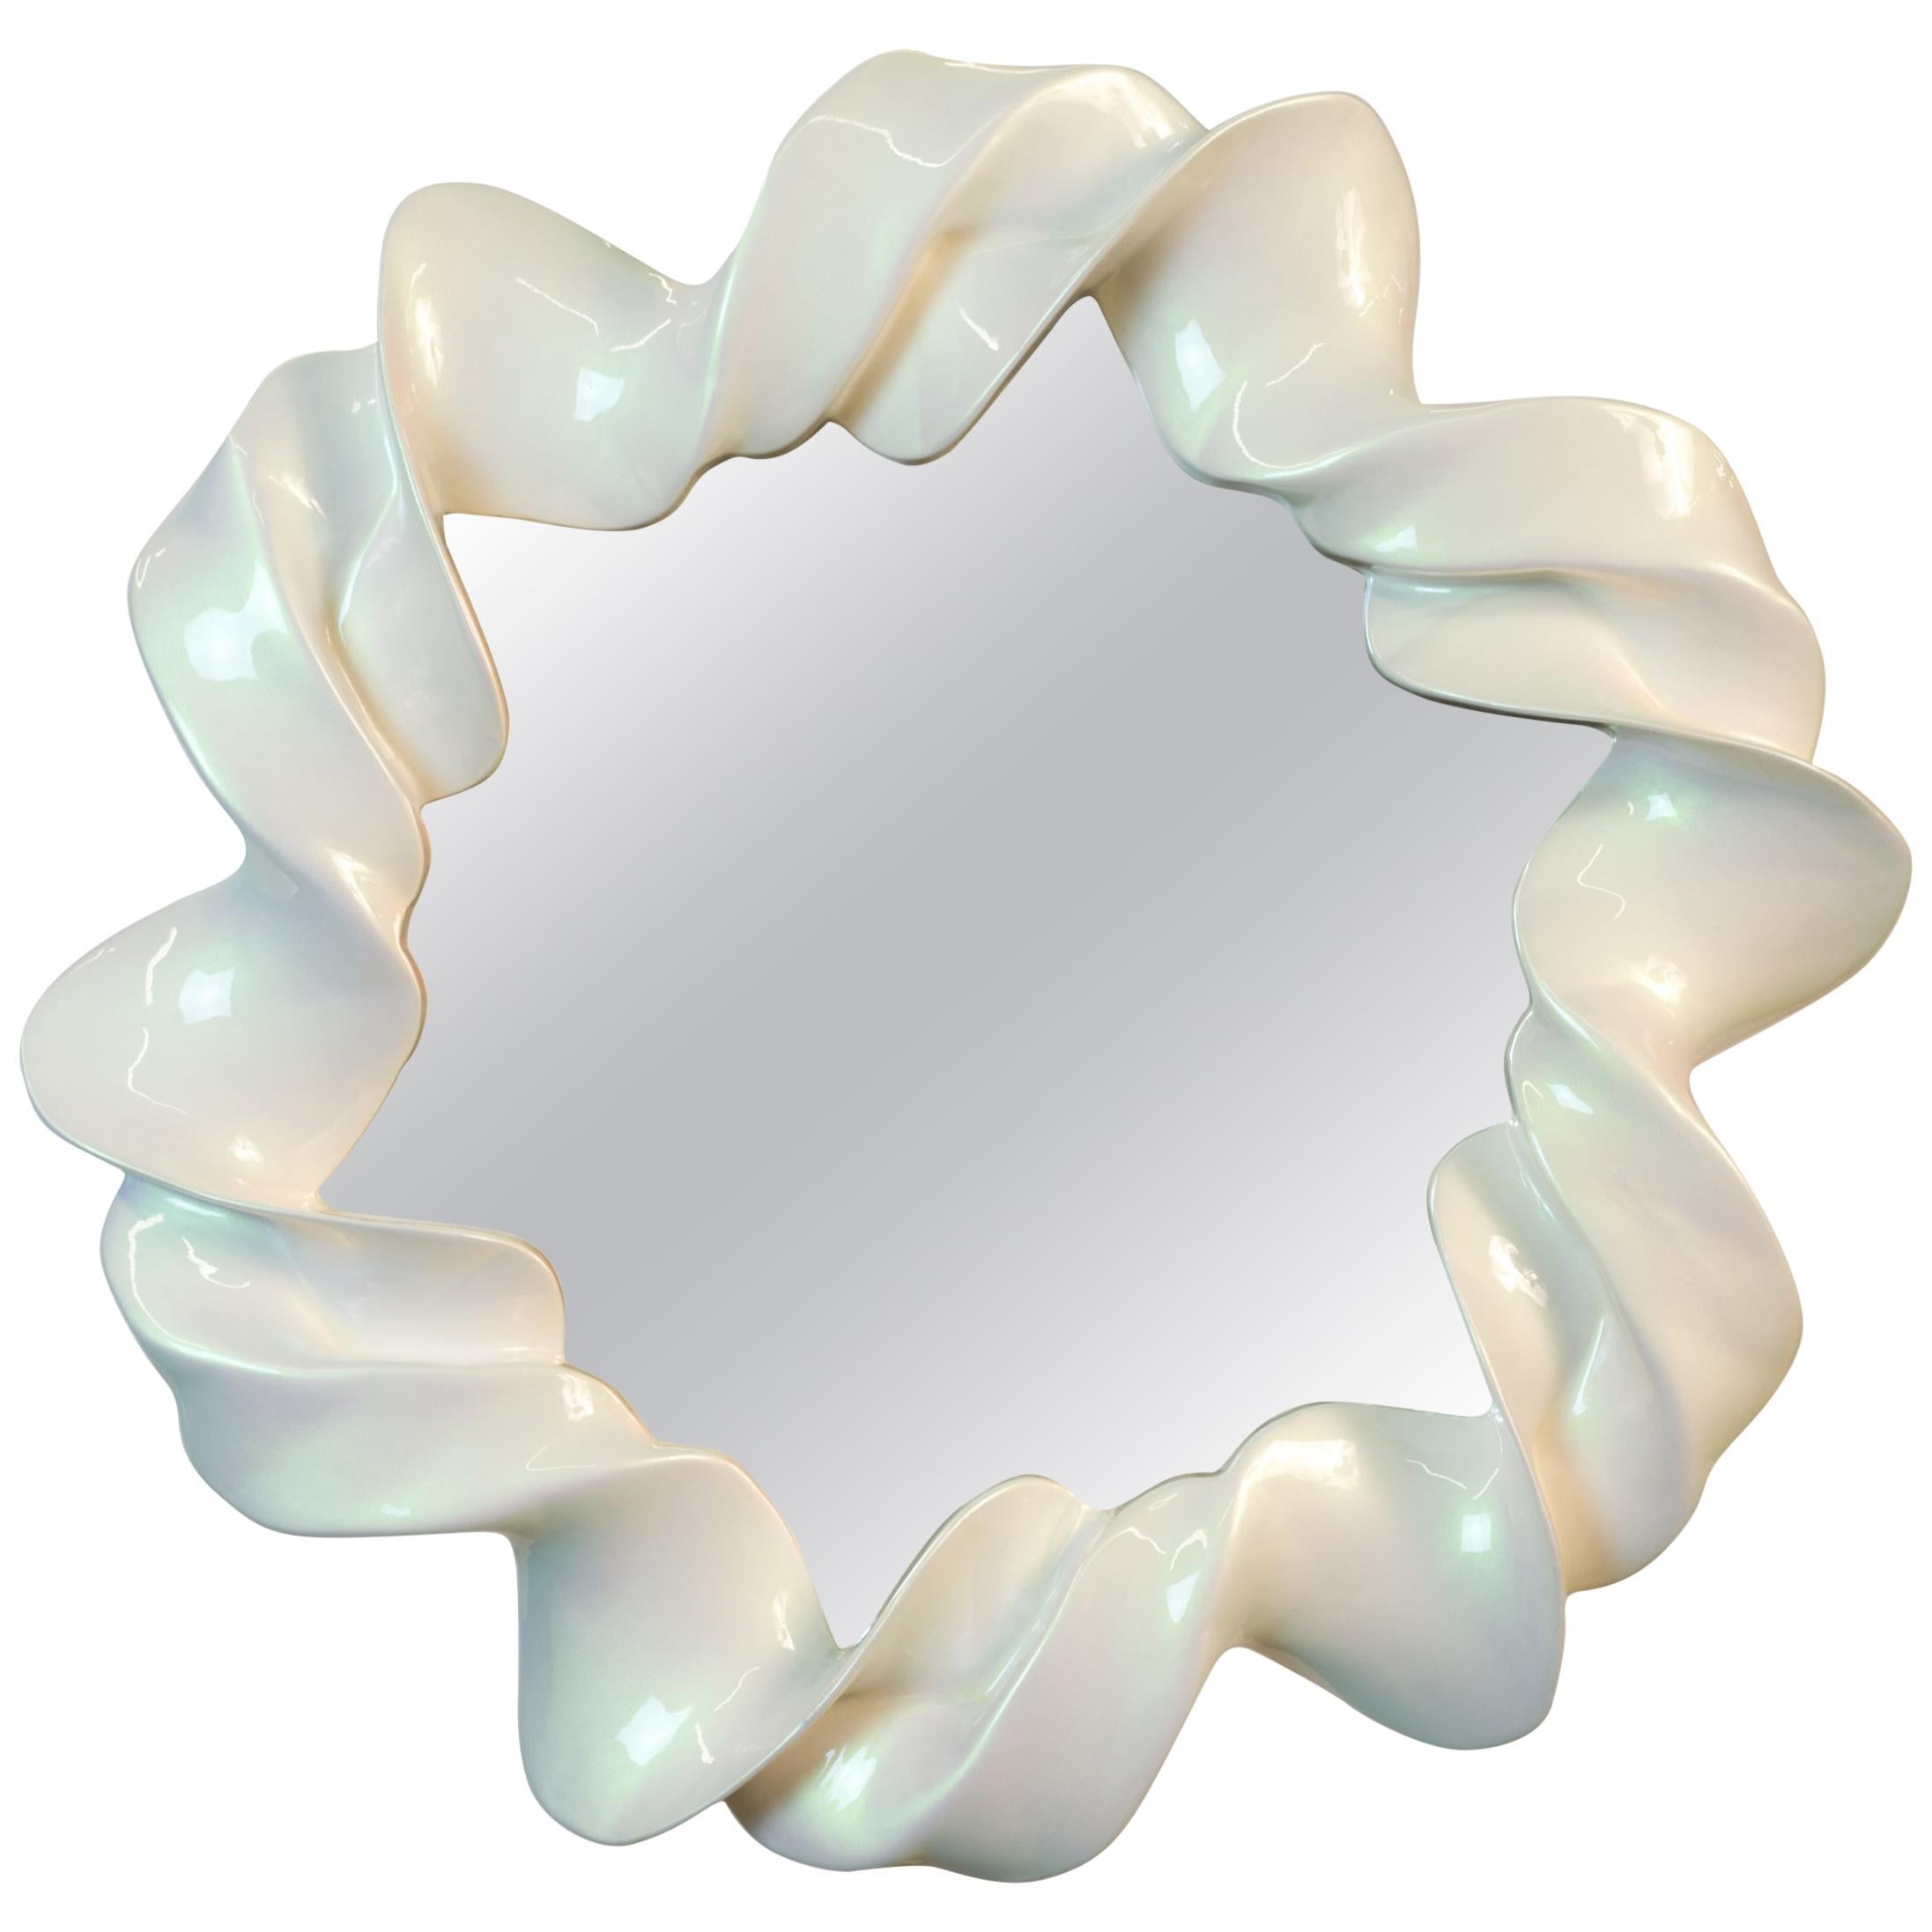 Wave II Series Mirror in Pearlescent Color Shift Lacquer